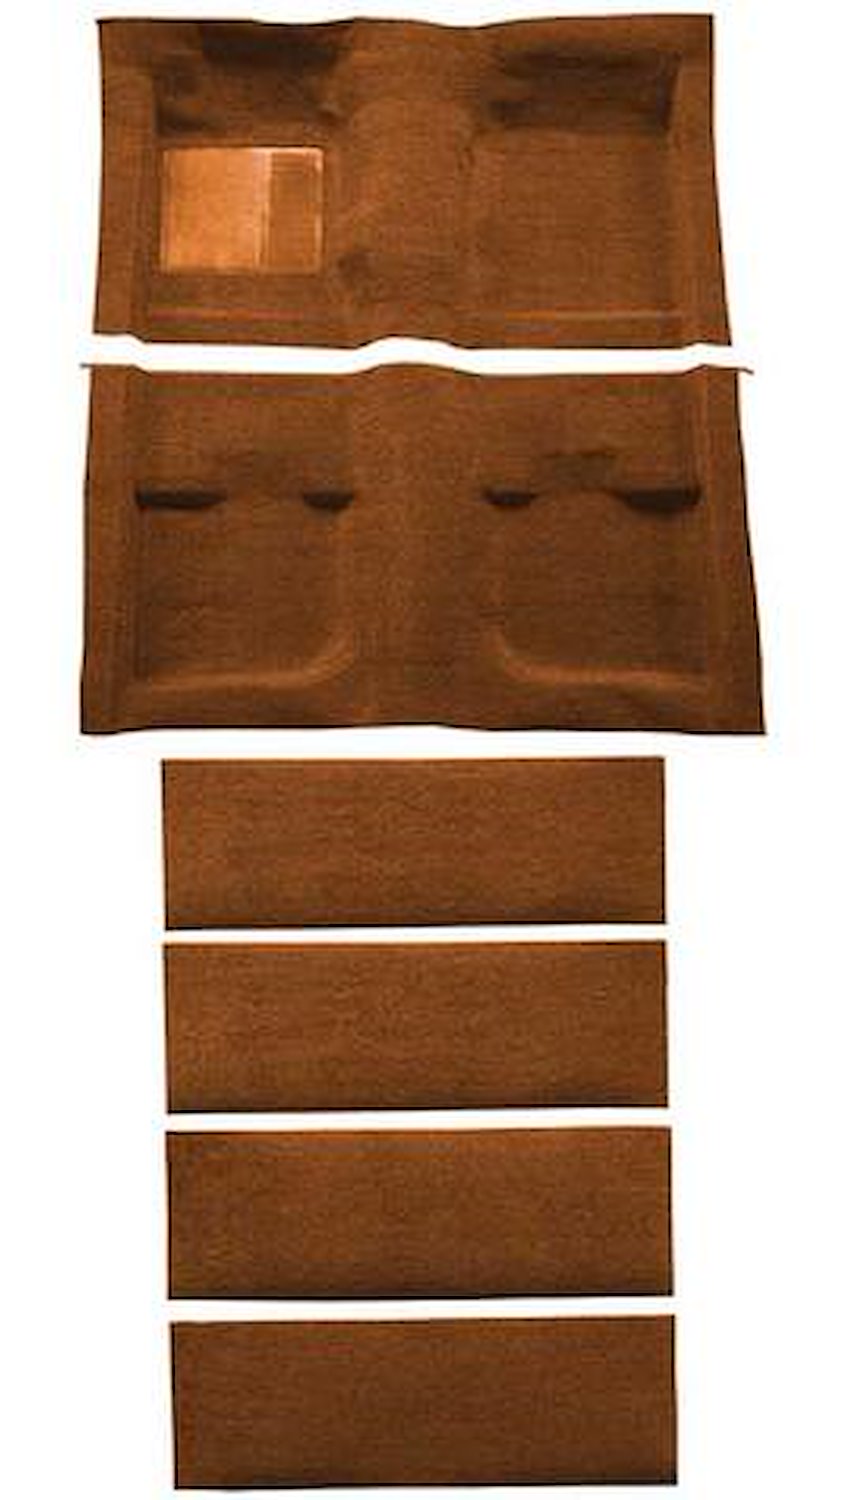 A4061A29 Nylon Loop Floor and Fold Down Seat Carpet Set 1971-73 Mustang Fastback; Ginger